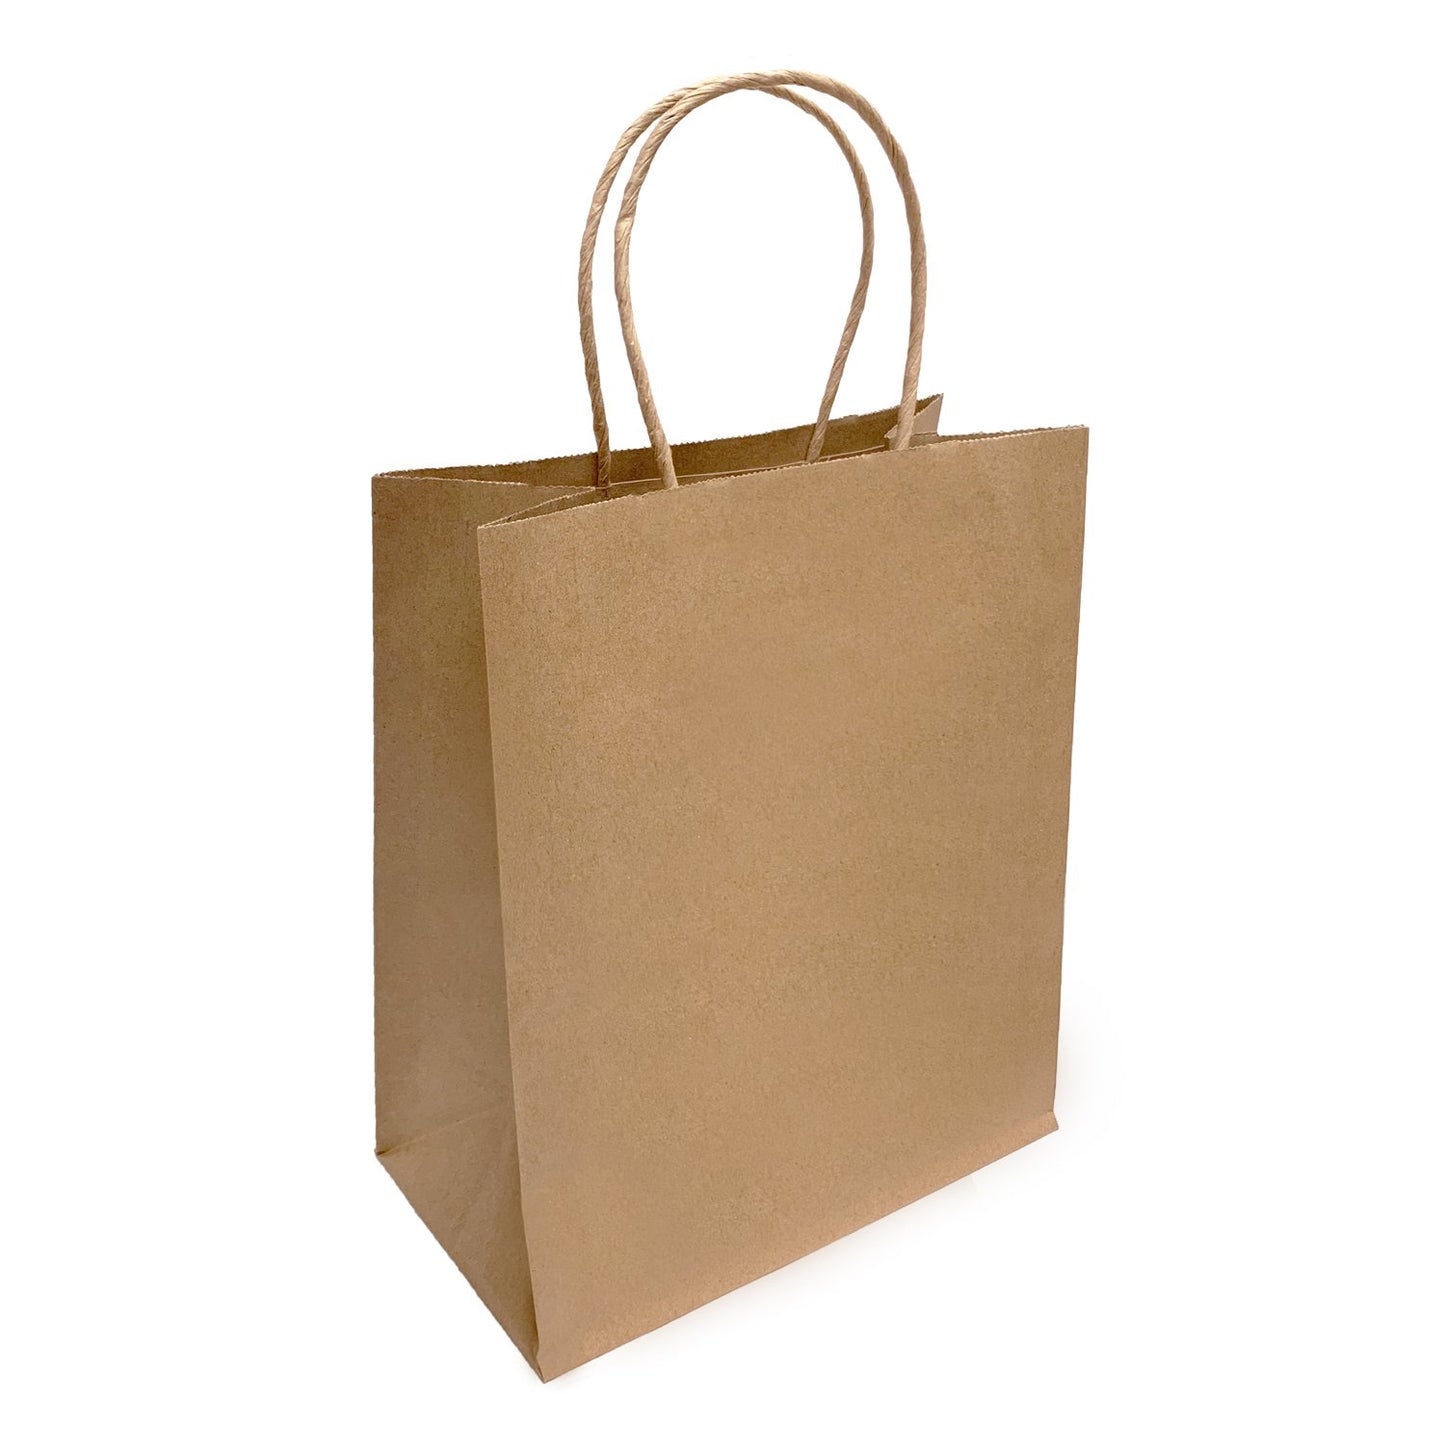 250 Pcs, Cub, 8x4.75x10.25 inches, Kraft Paper Bags, with Twisted Handle